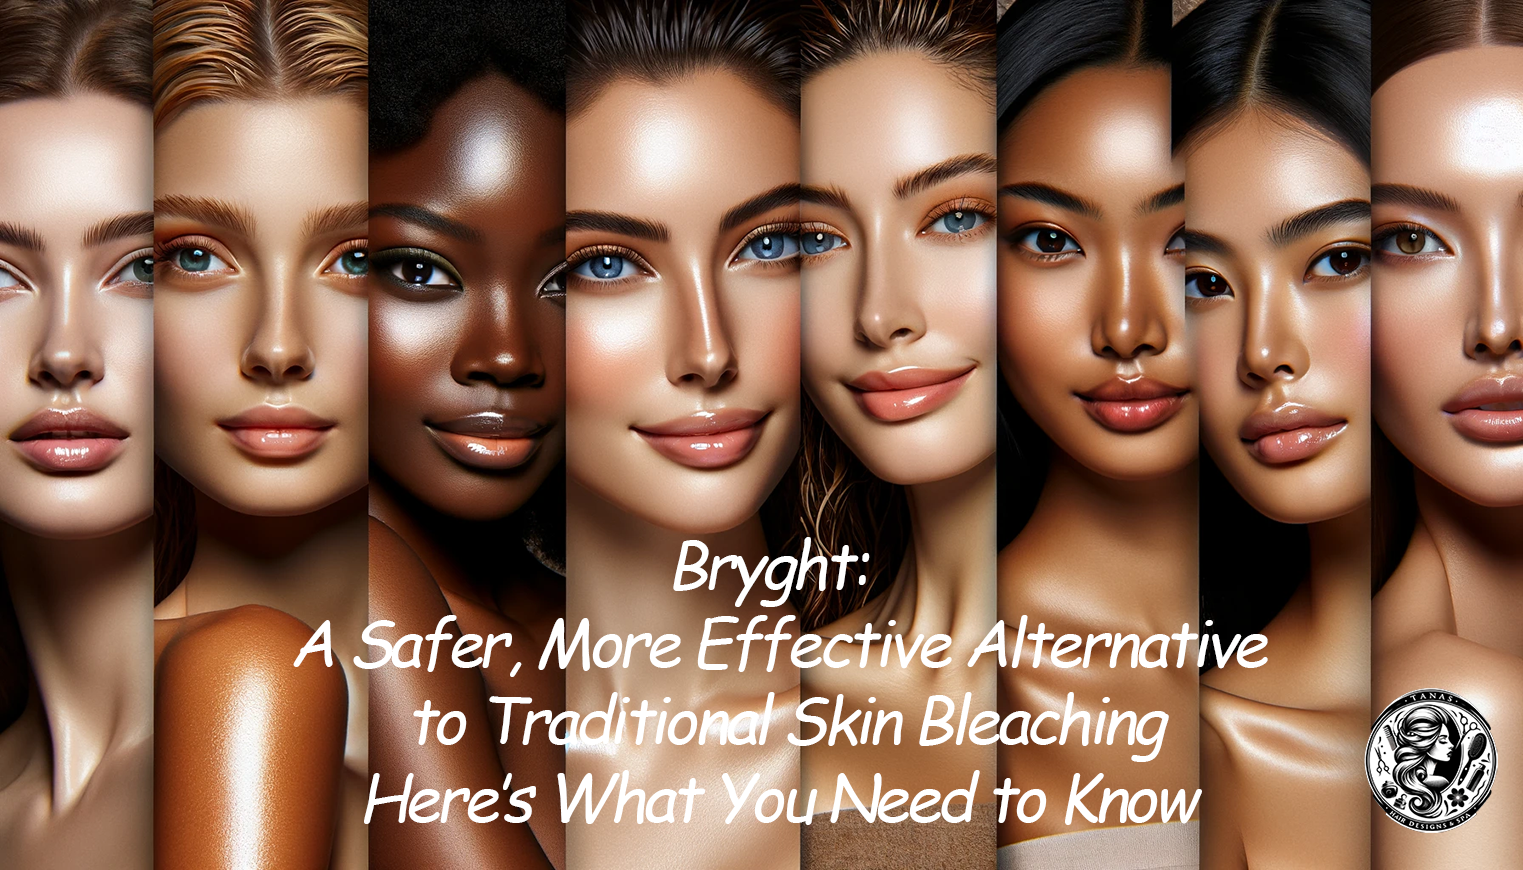 Bryght: A Safer, More Effective Alternative to Traditional Skin Bleaching – Here’s What You Need to Know